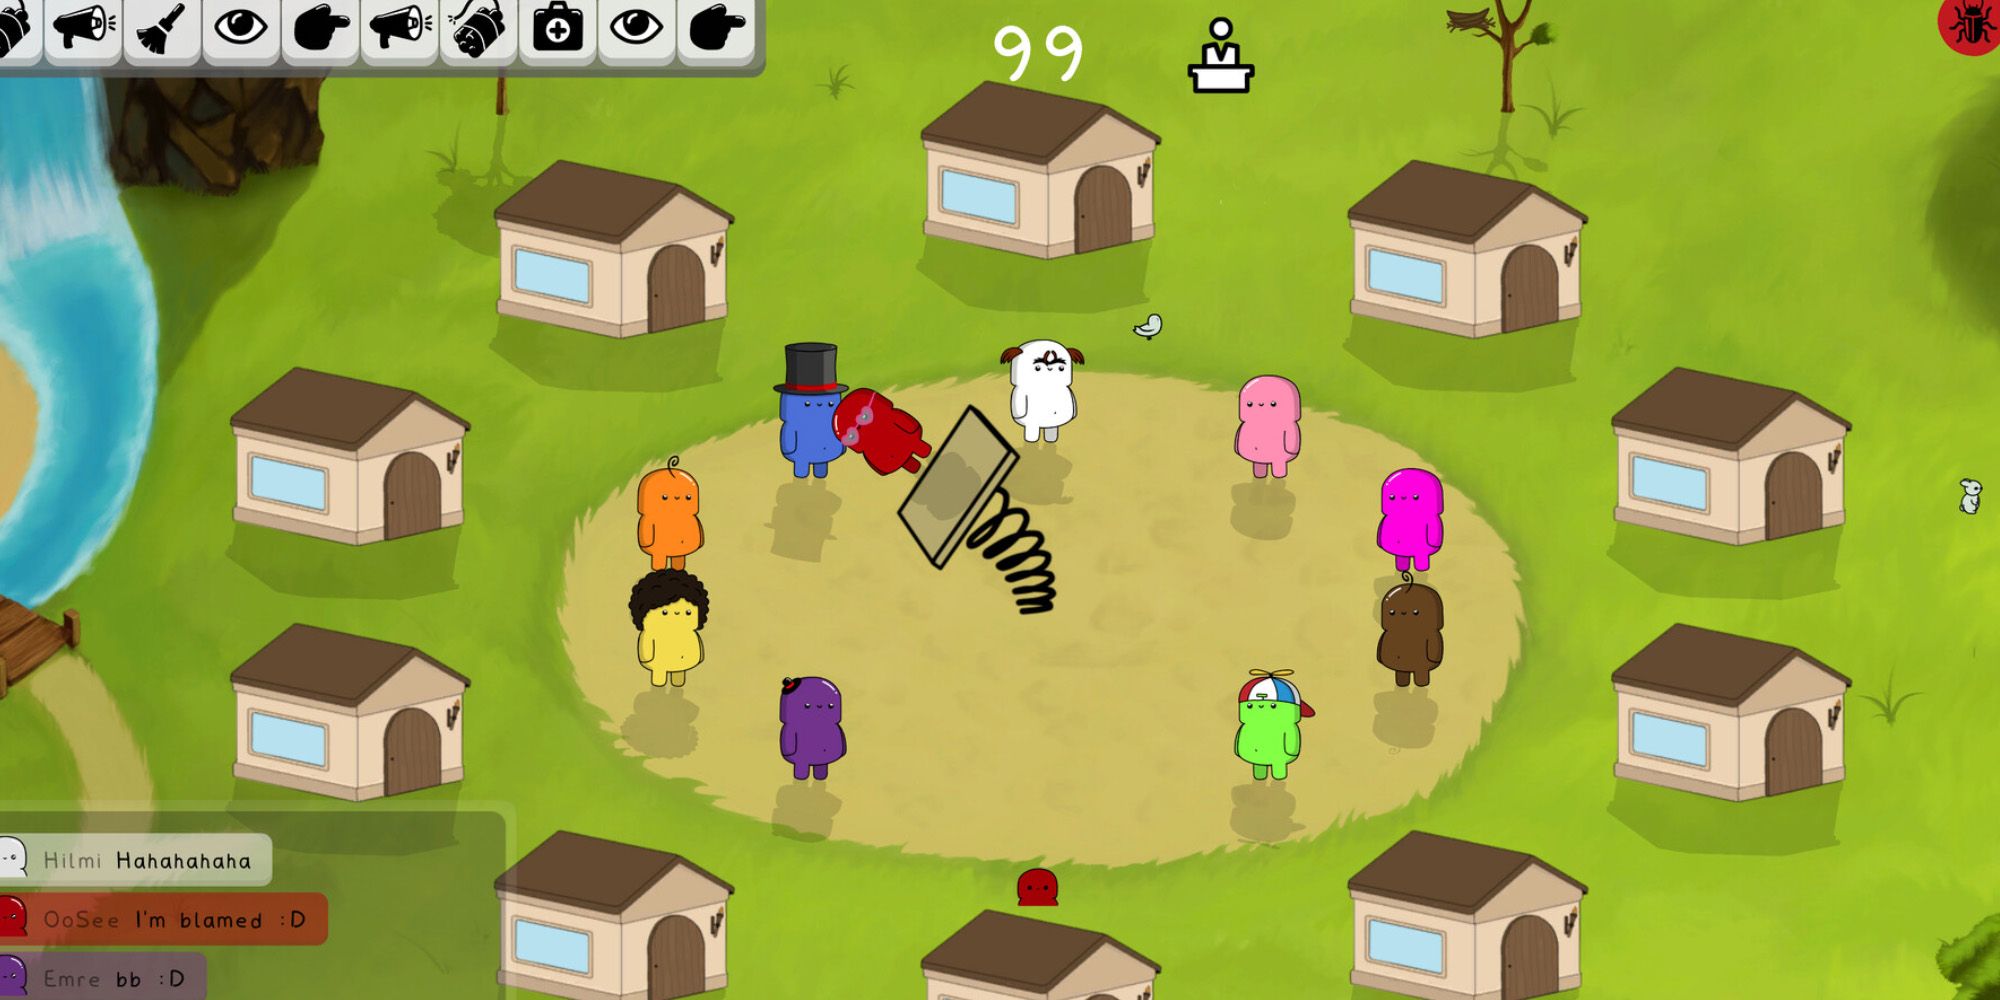 Feign social deduction game similar to town of salem with blobs